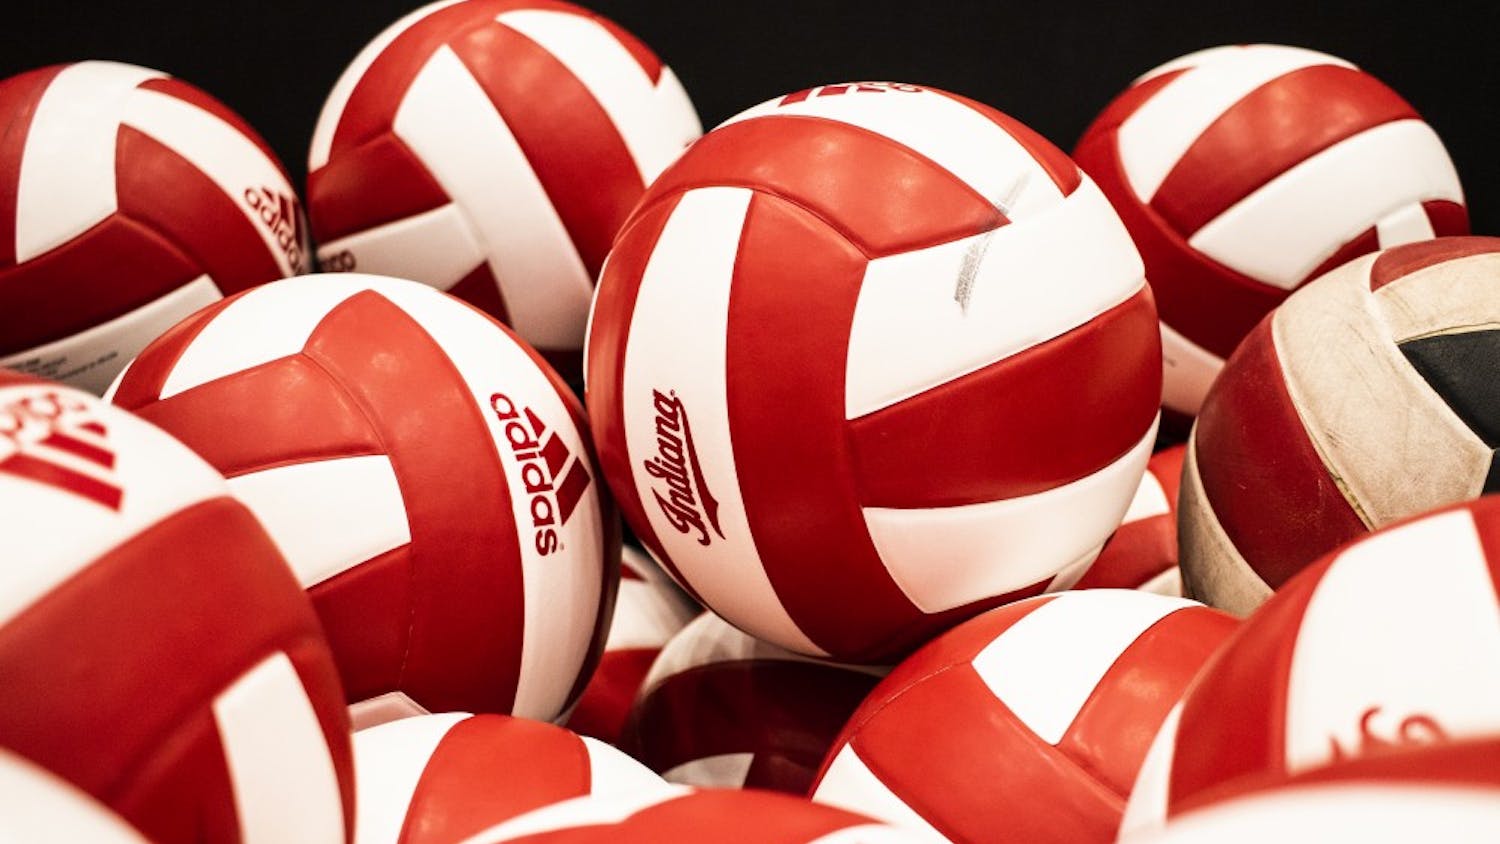 Volleyballs are stacked in a basket June 19 in Wilkinson Hall. IU will play Illinois on Oct. 4 at home.